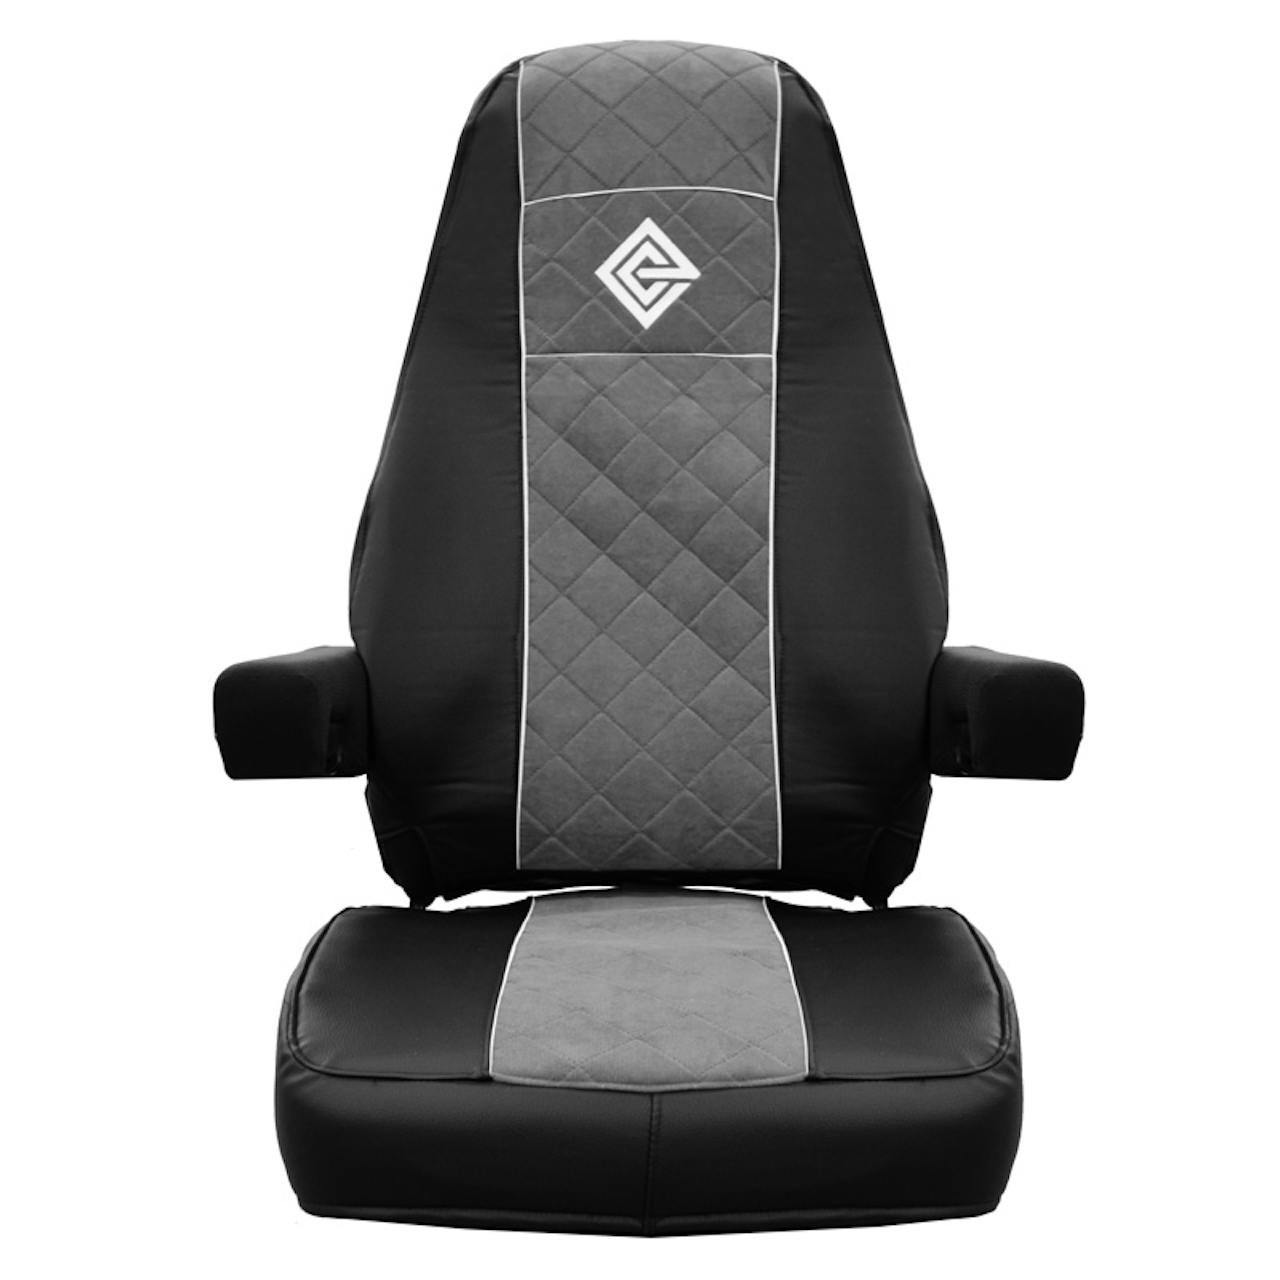 https://raneys-cdn11.imgix.net/images/stencil/original/products/197039/121471/gray-and-black-seat-cover__80629.1524183039.jpg?auto=compress,format&w=1280